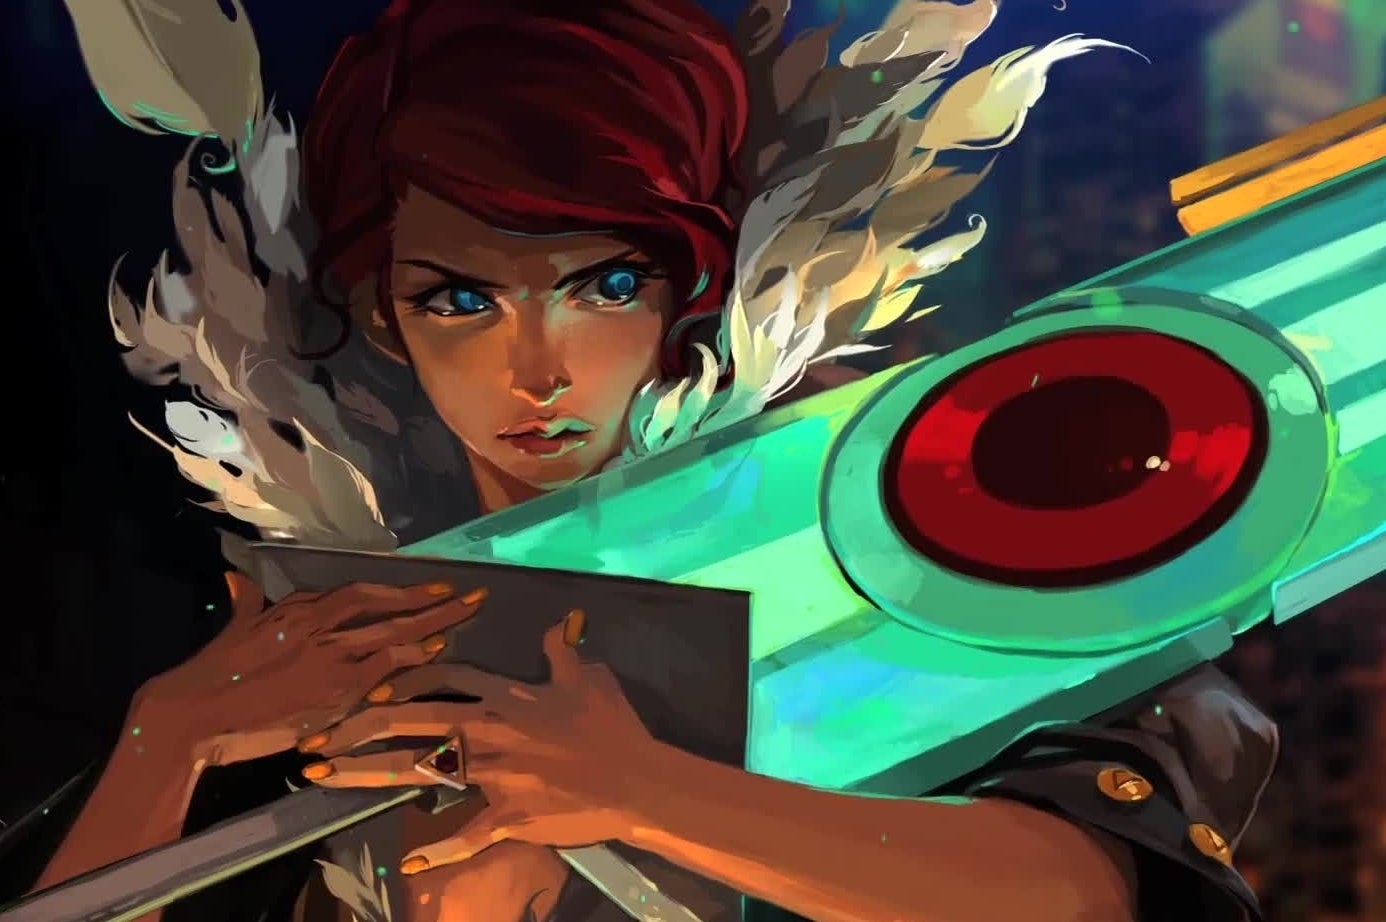 Image for 15 minutes of Bastion creator's new game Transistor